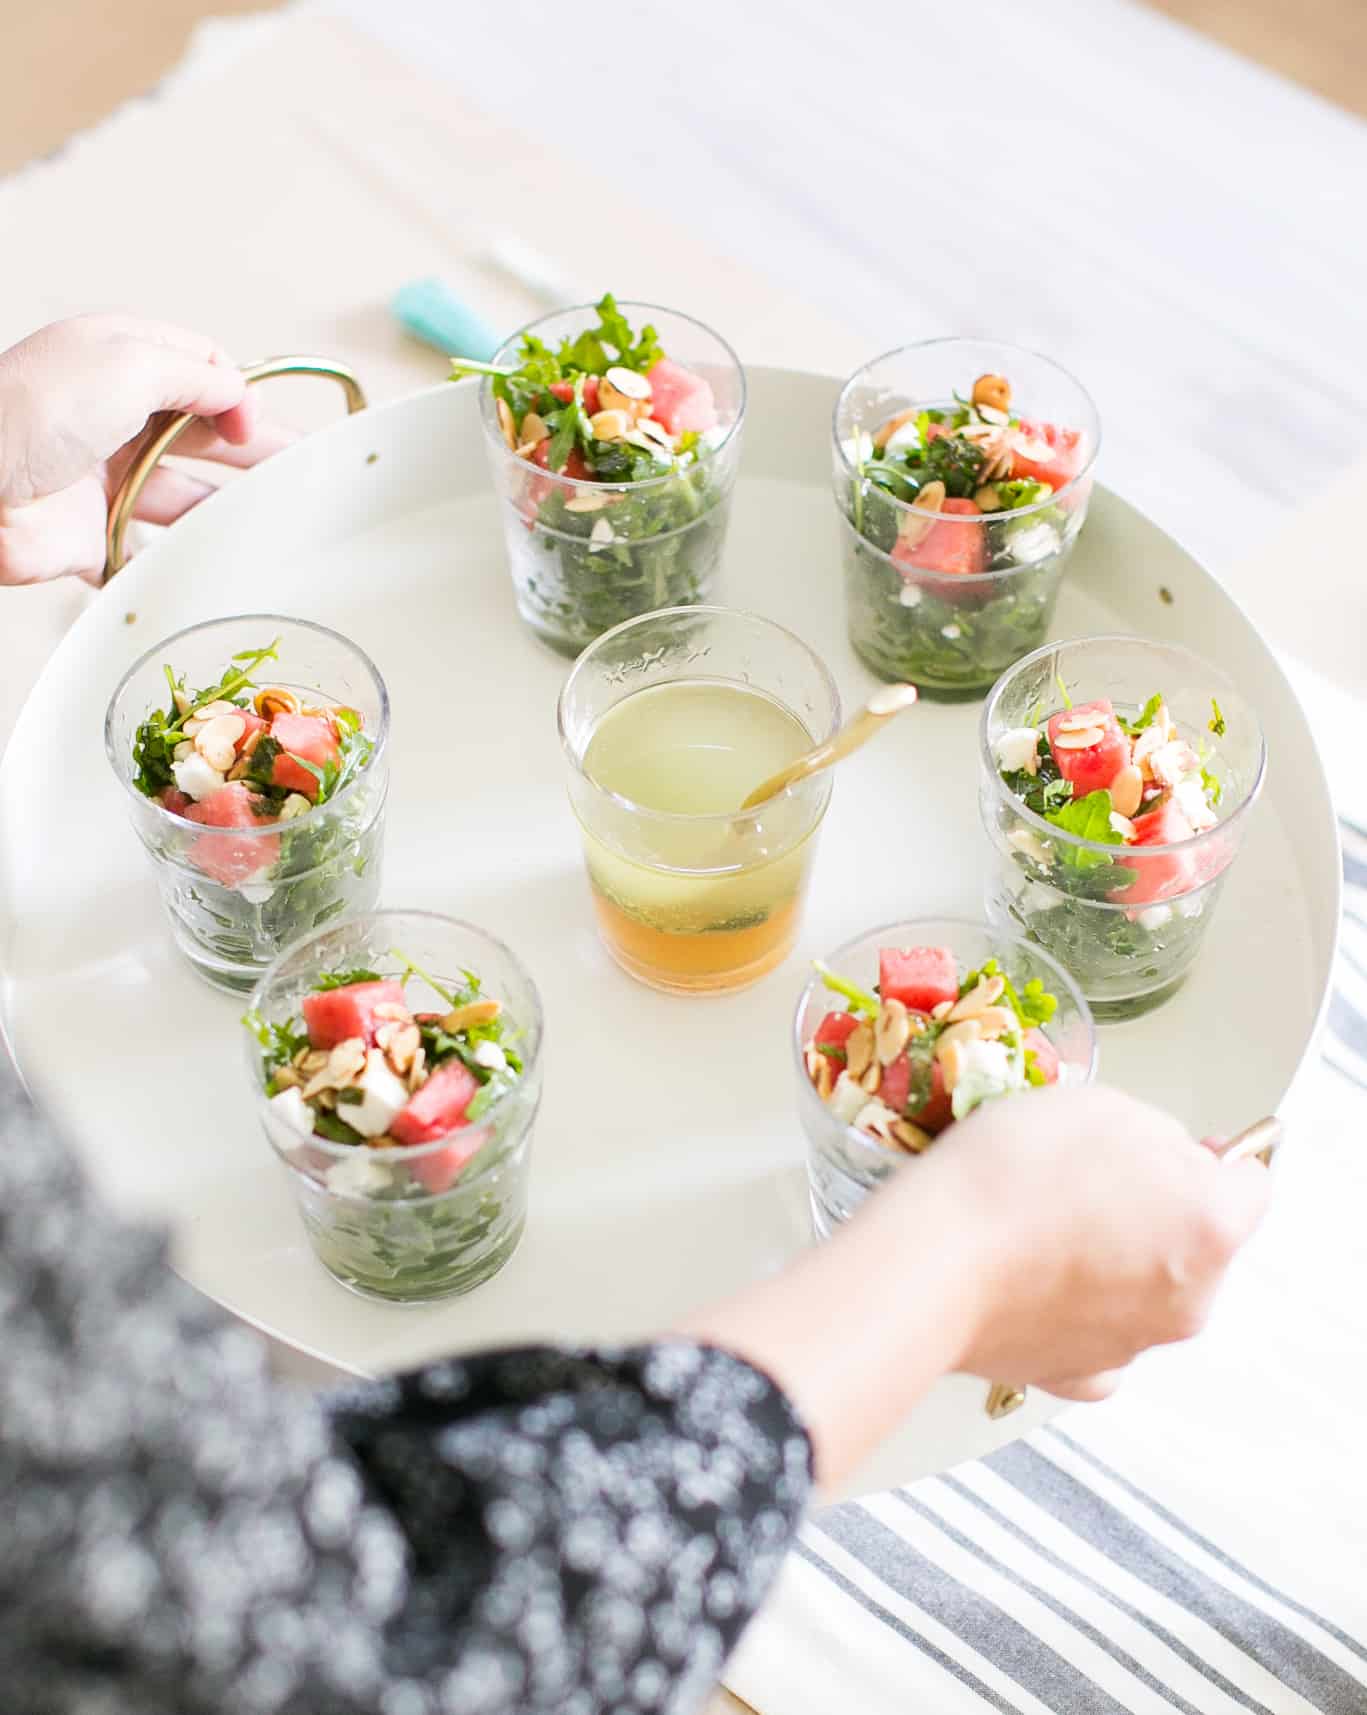 Celebrate Summer Flavors with This Easy Watermelon Mint Salad